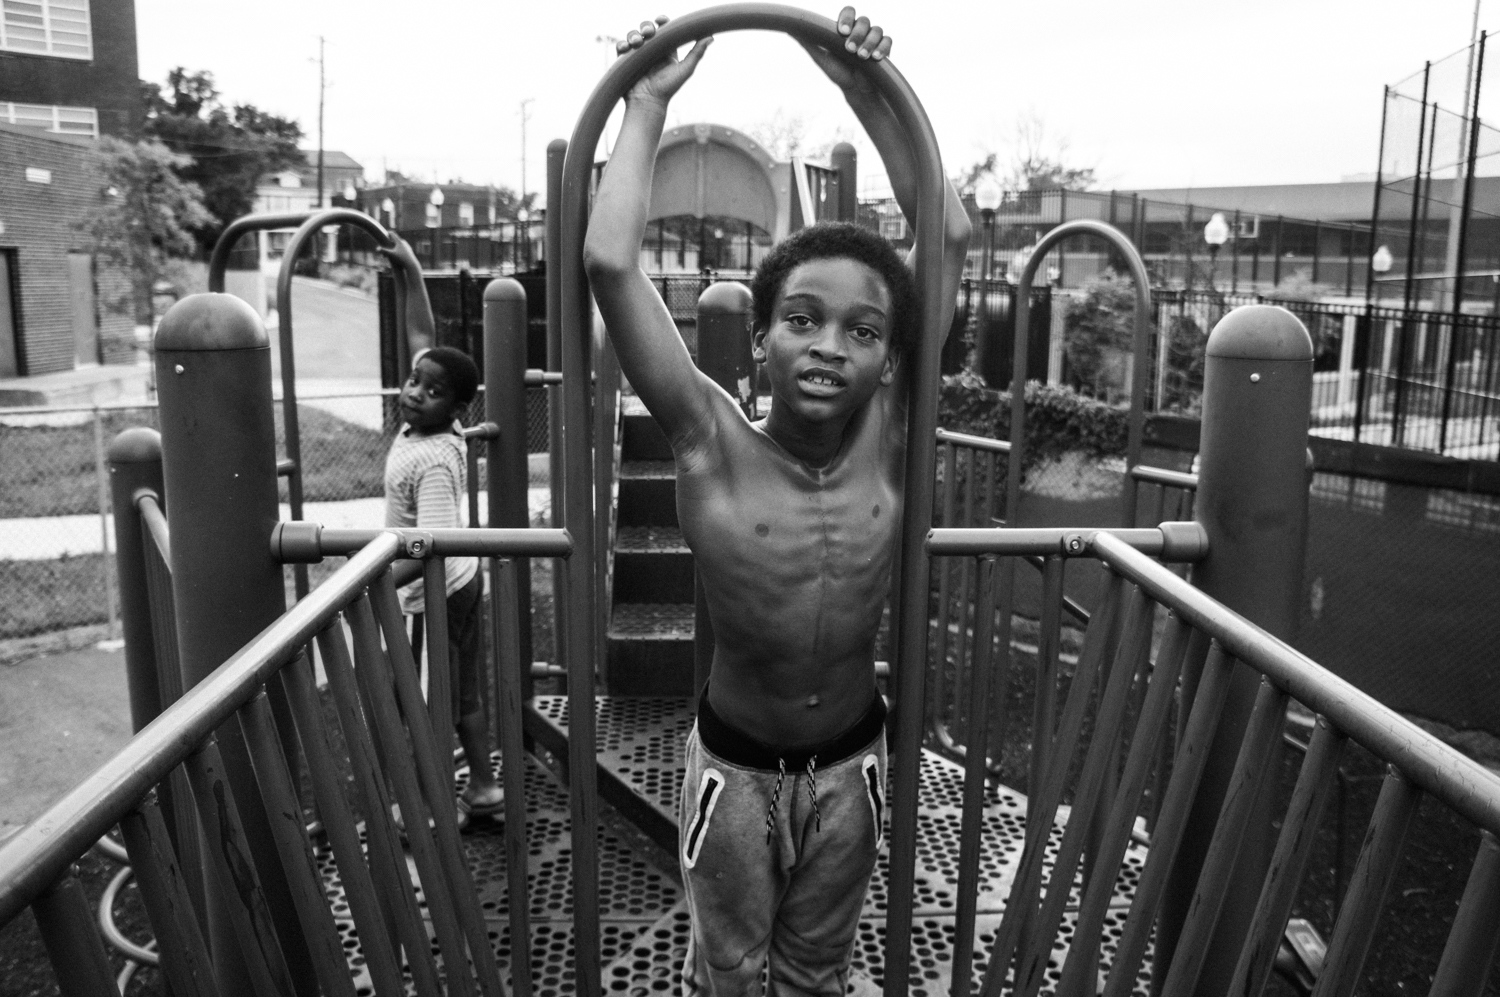  Dylan Marshall swings on a playground with his friend &ldquo;Little Sean&rdquo; on July...